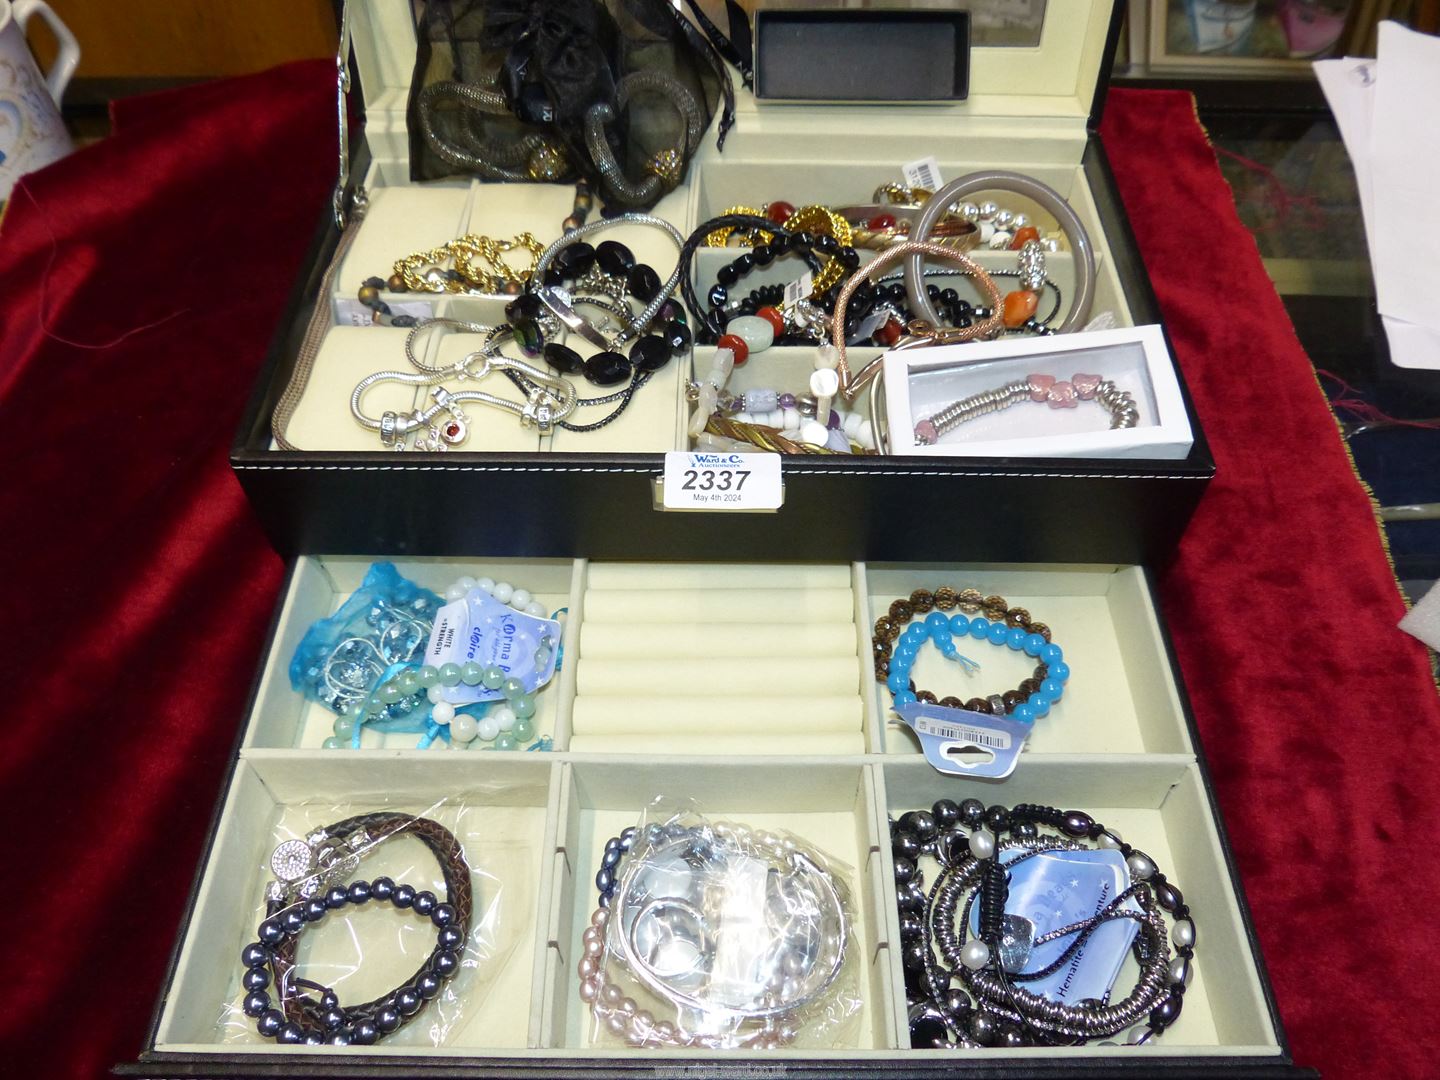 A black jewellery box containing various bracelets including, metal, leather, charm bracelets, - Image 2 of 3